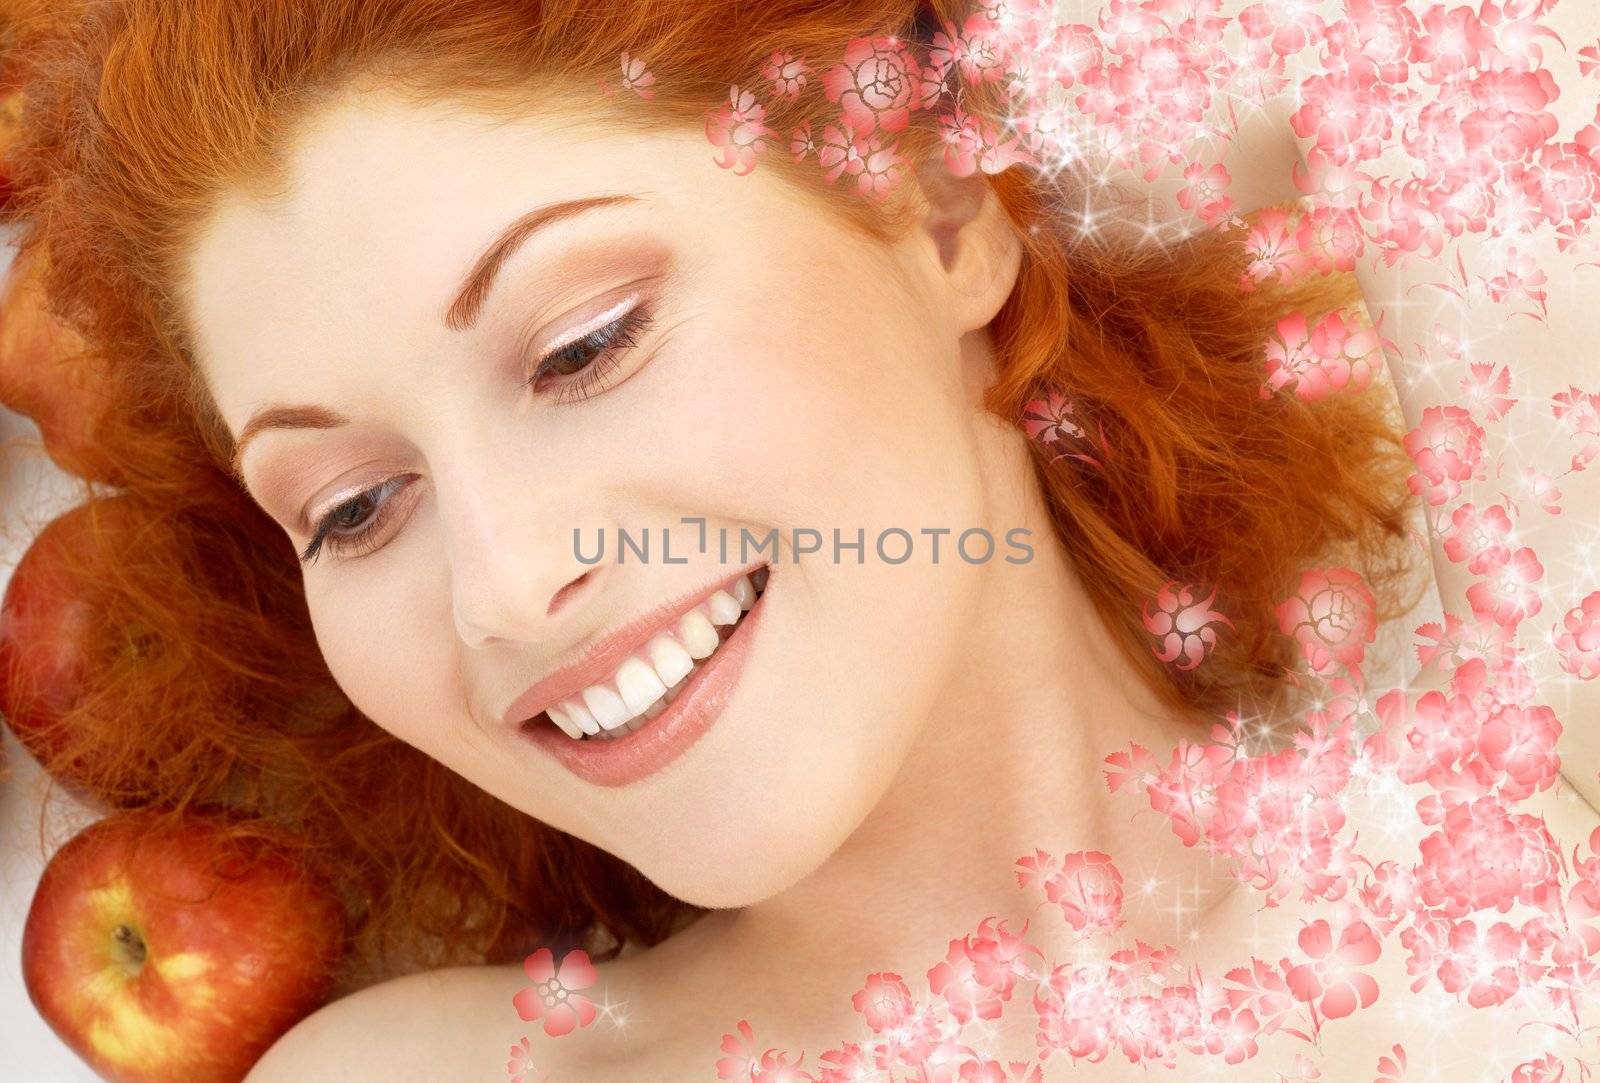 picture of lovely redhead with red apples and flowers